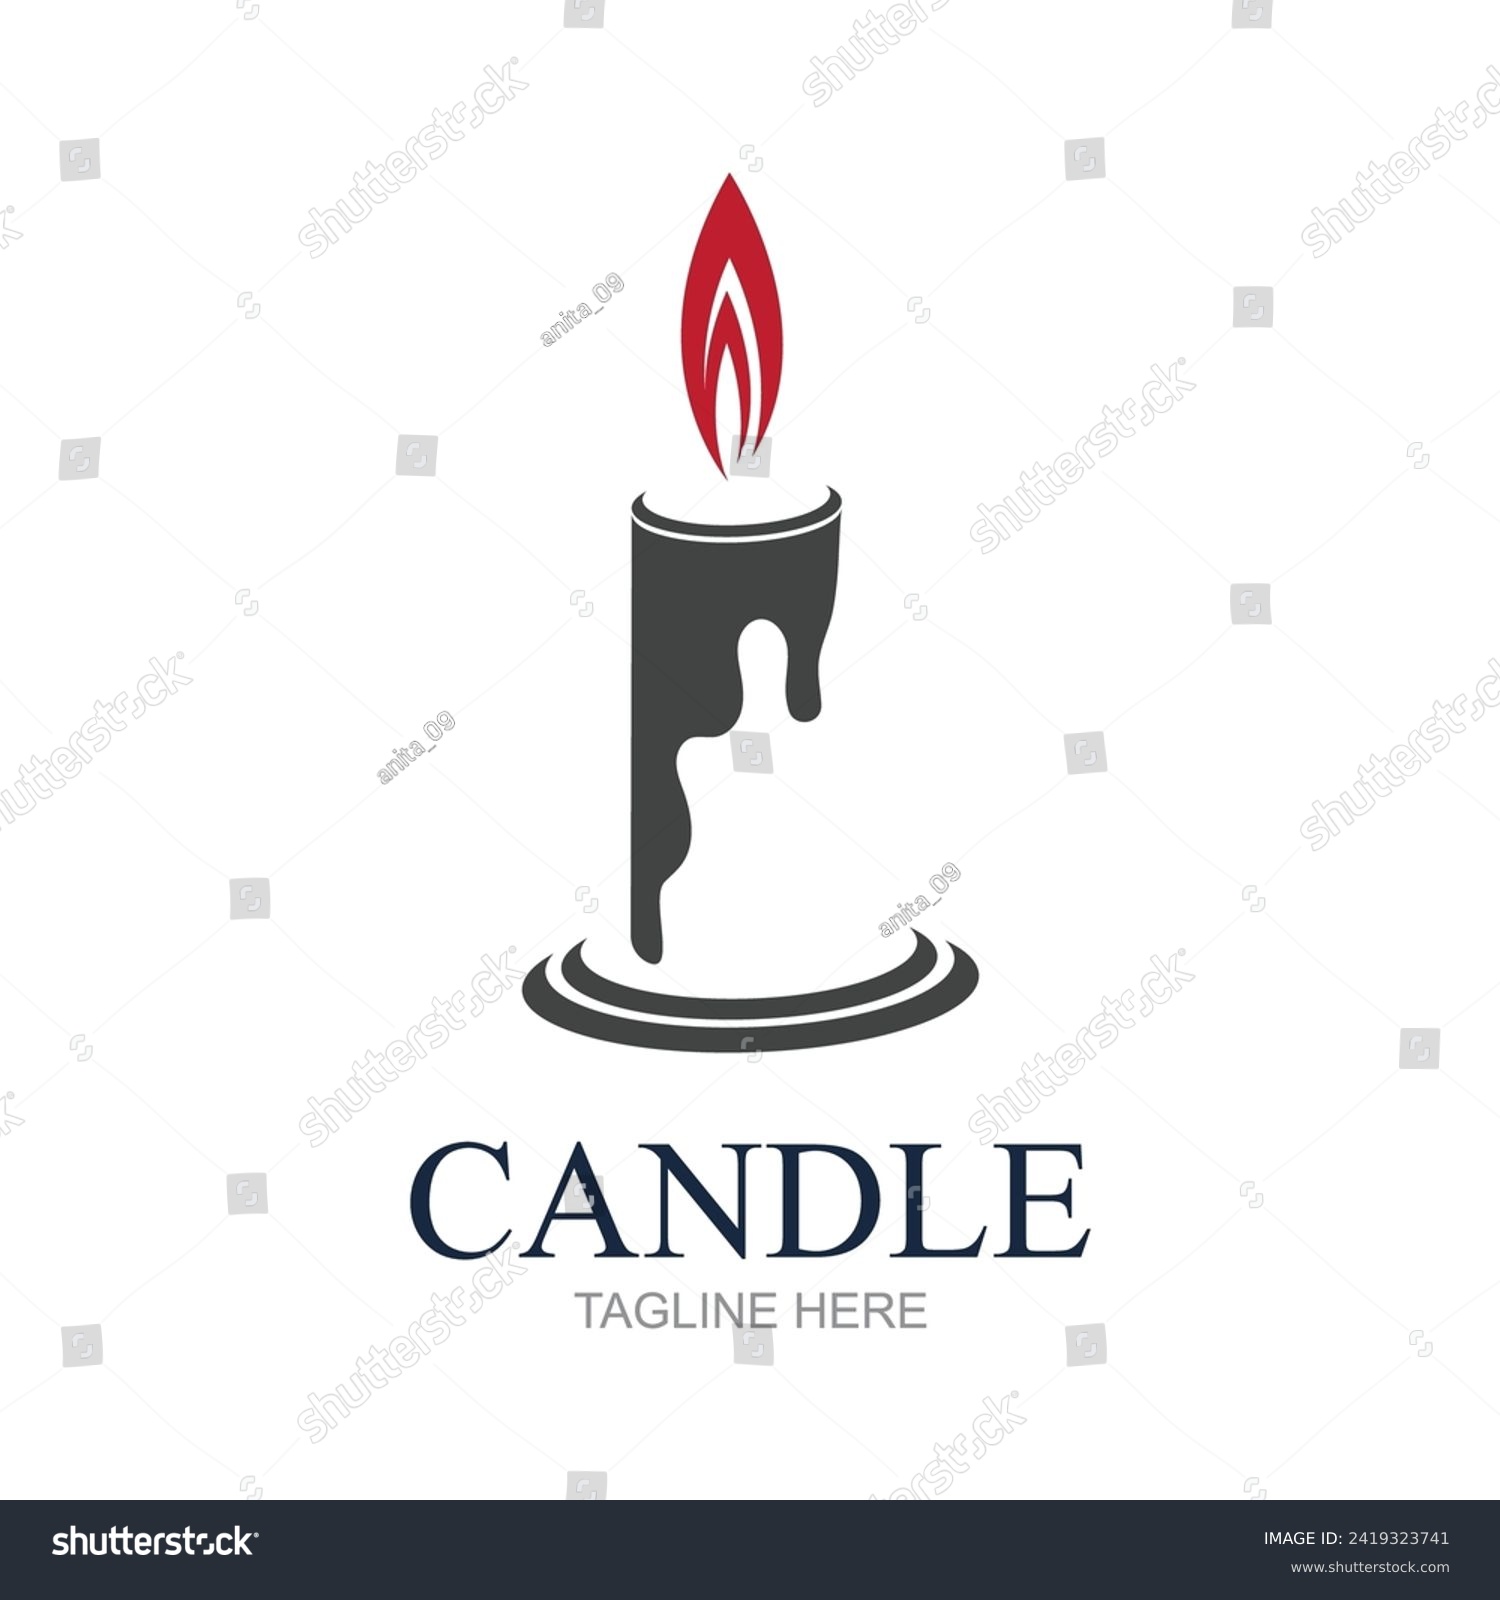 SVG of Candle flame logo in a frame,Bright fire shape vector illustration svg